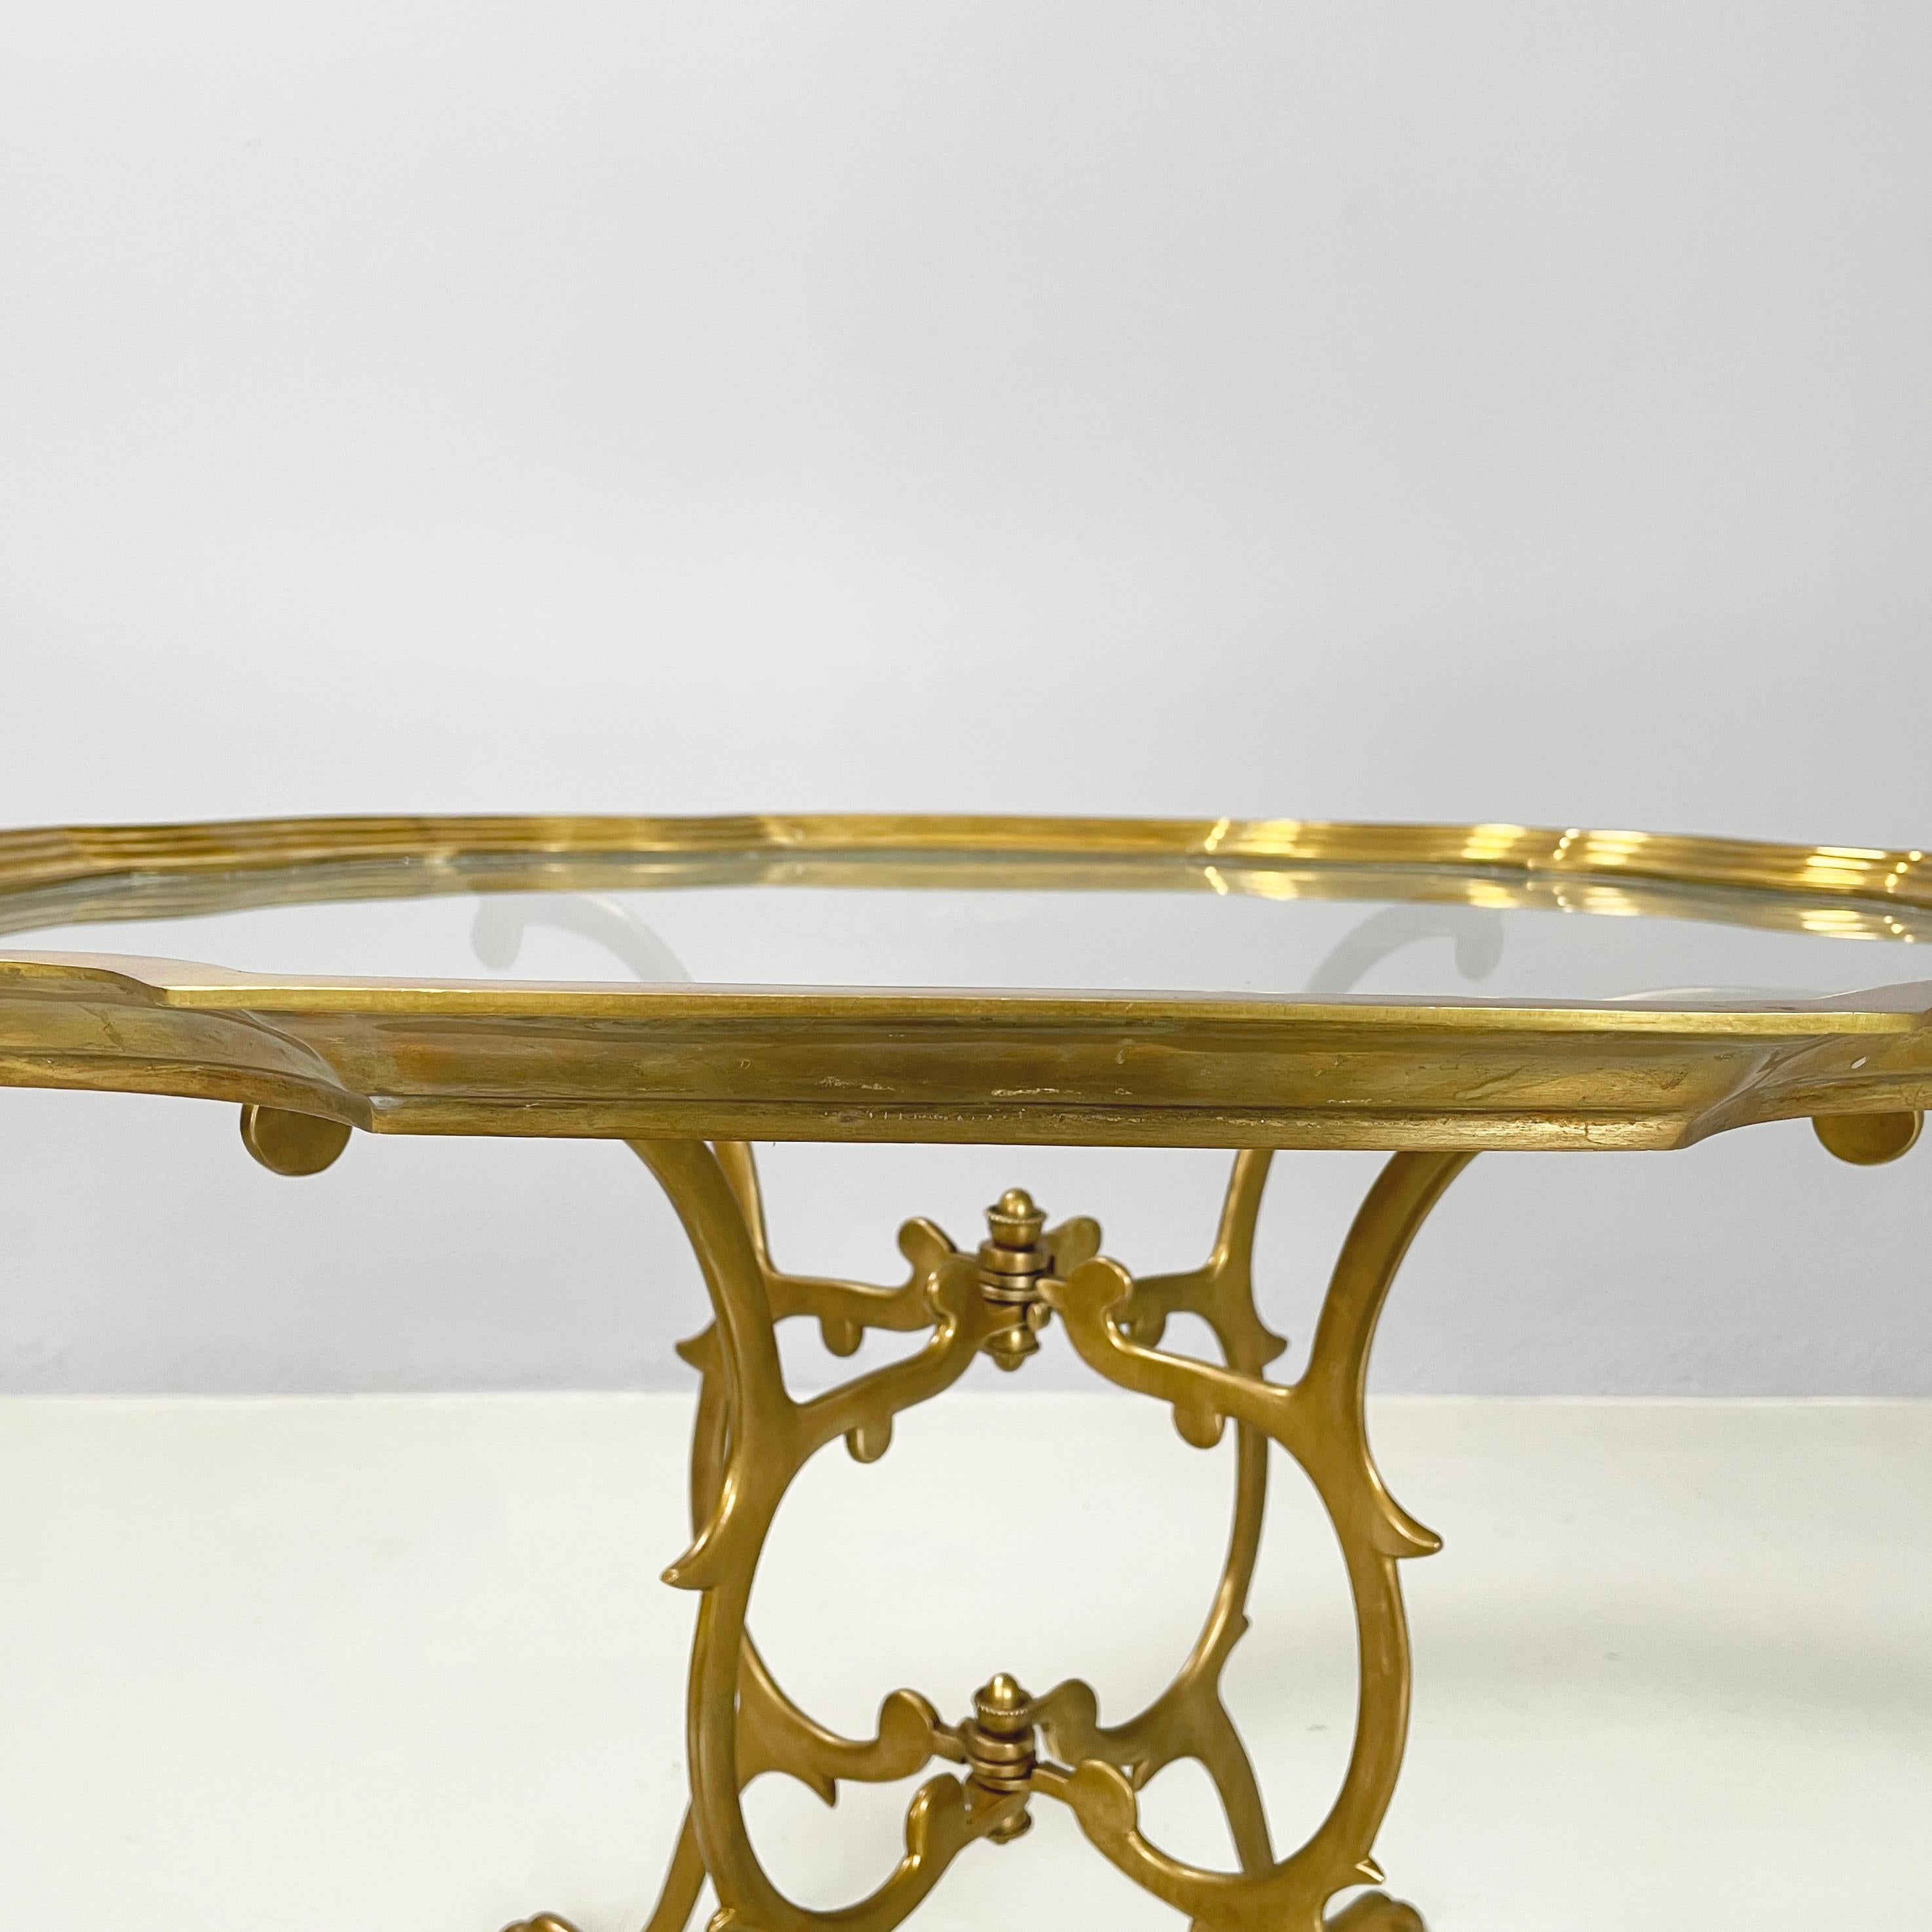 Italian mid-century modern Coffee table in glass and brass, 1960s For Sale 3